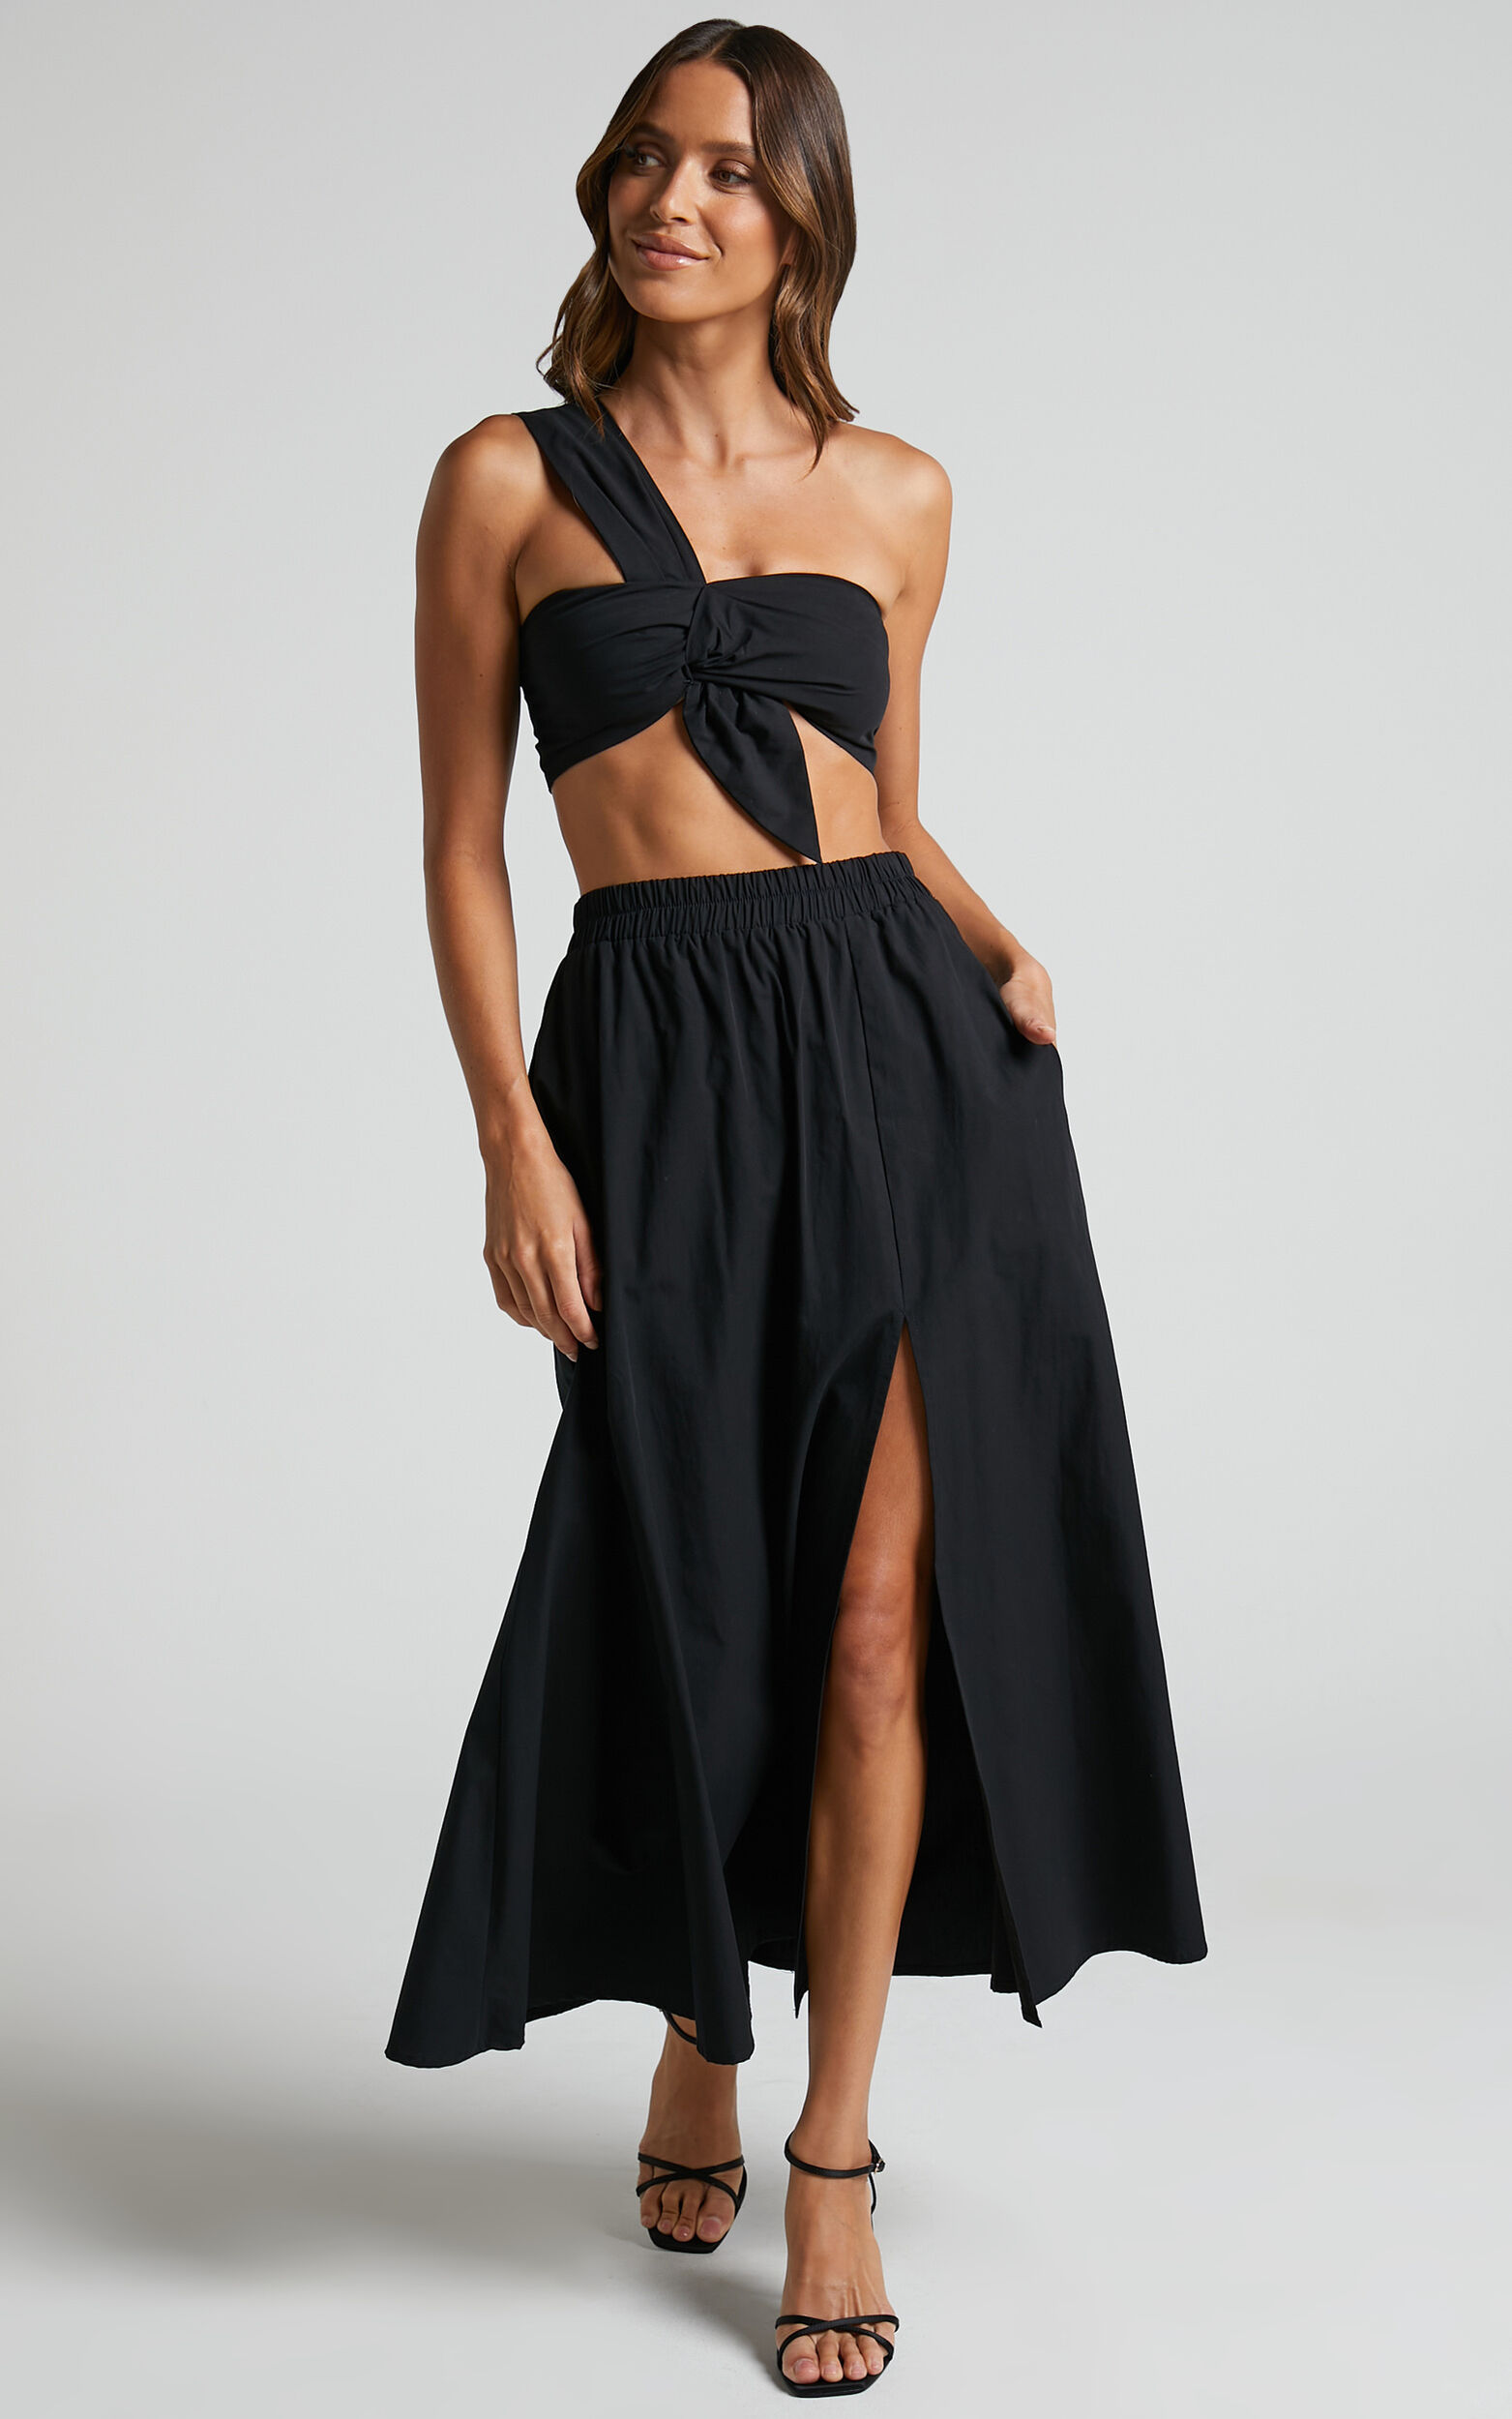 Sula Two Piece Set - One Shoulder Bralette Crop Top and Midaxi Skirt Set in Black - 04, BLK1